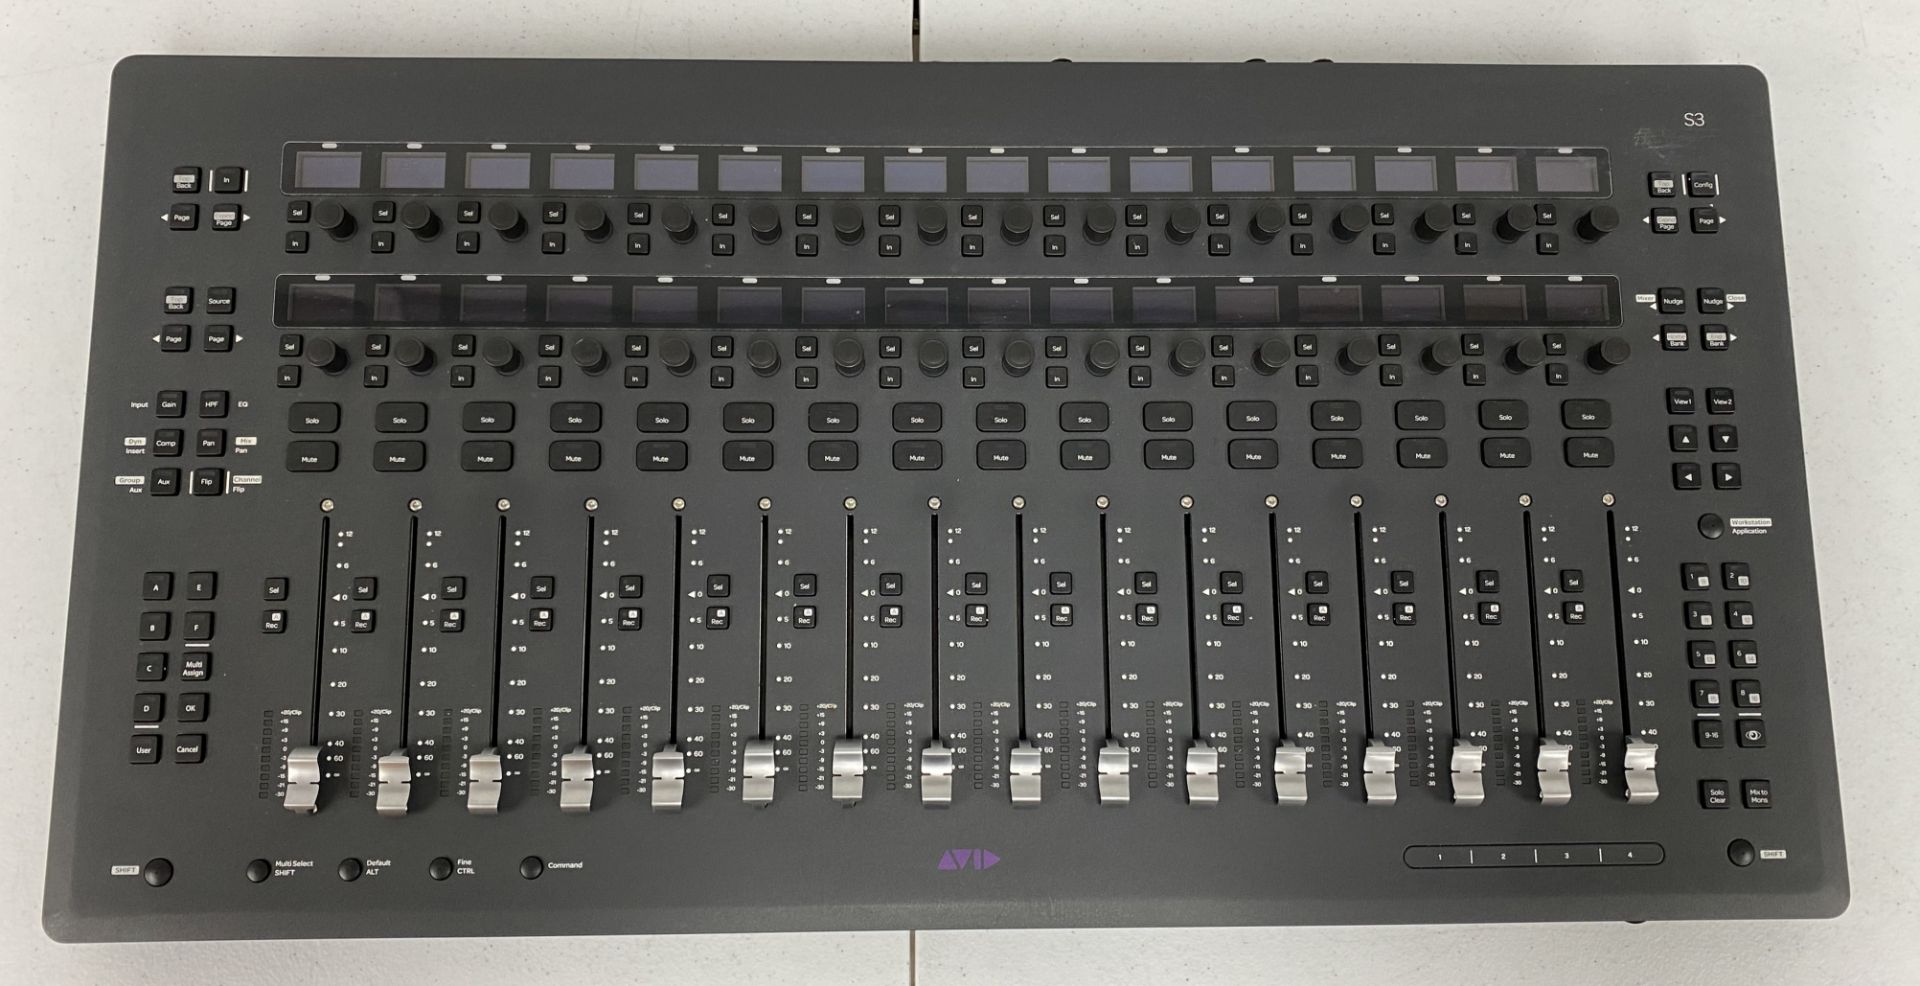 A pre-owned Avid S3 16 Channel Mixing Desk/Audio Controller (PSU included) (Powers on but not tested